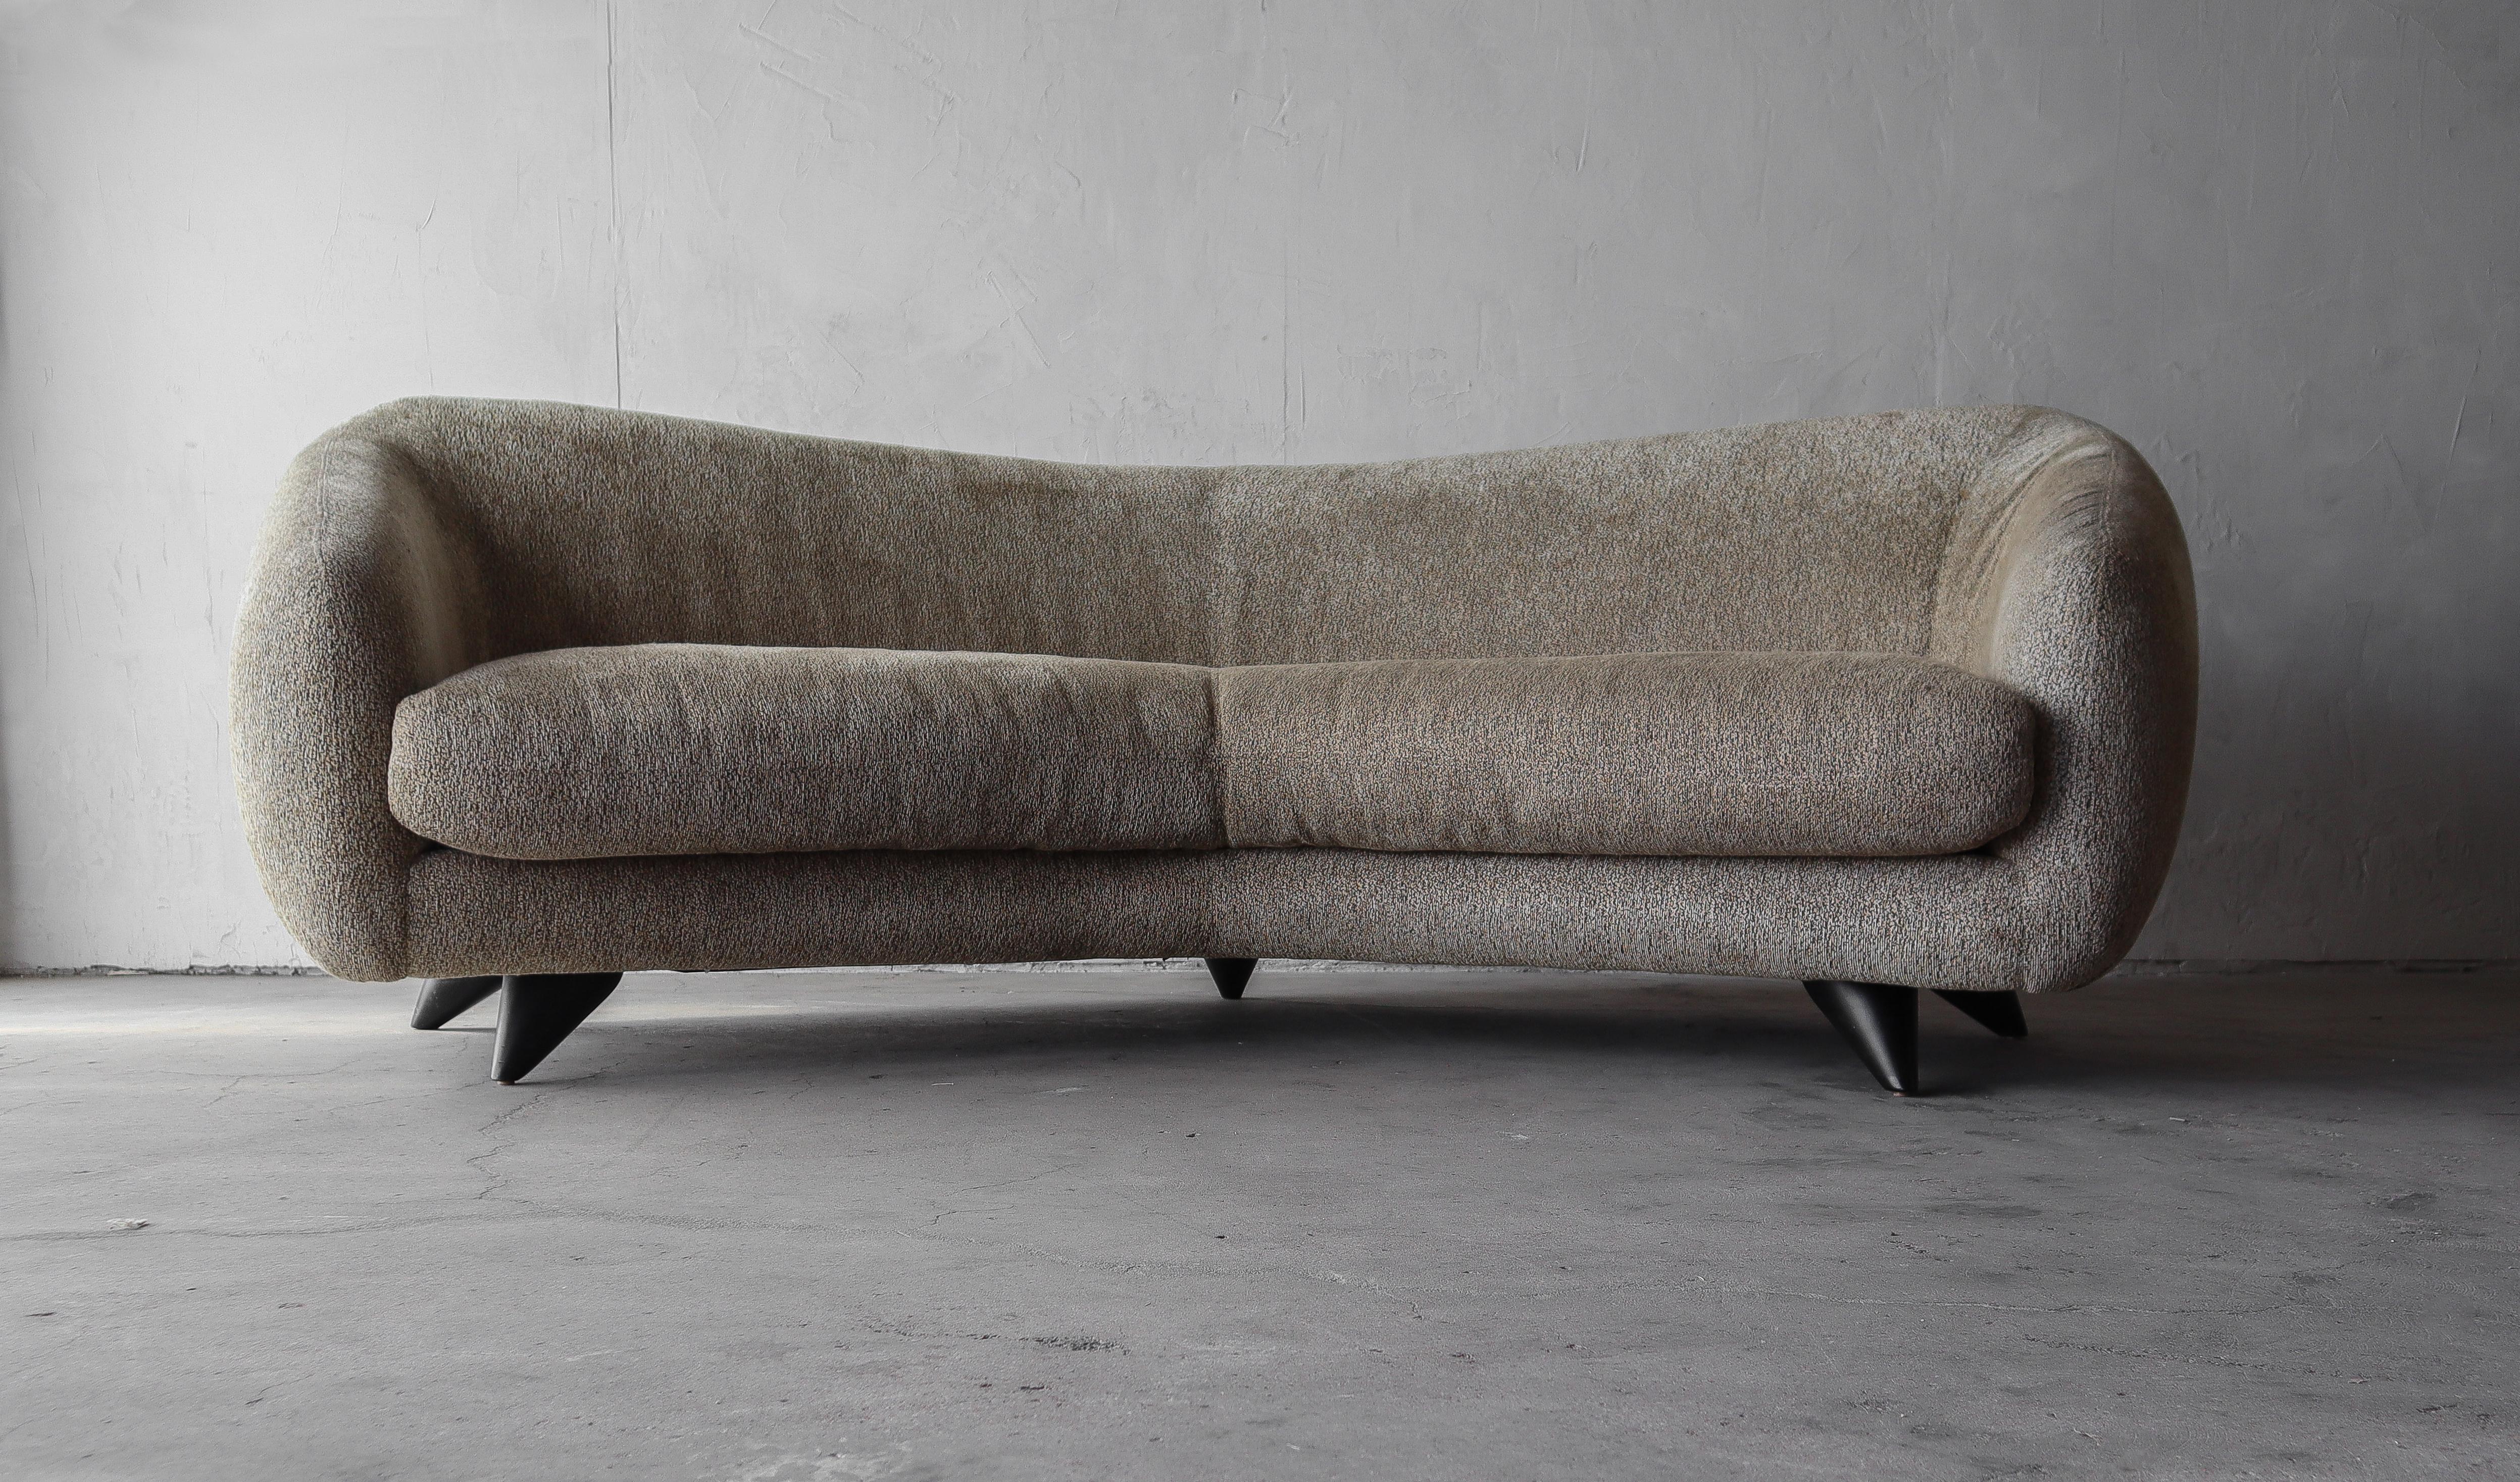 Extremely rare Tangent sofa by Vladimir Kagan for Preview Furniture. The sofa is part of a 3 piece set. Everything is all original with the Preview tags still intact. It is extremely comfortable and even more stylish.

